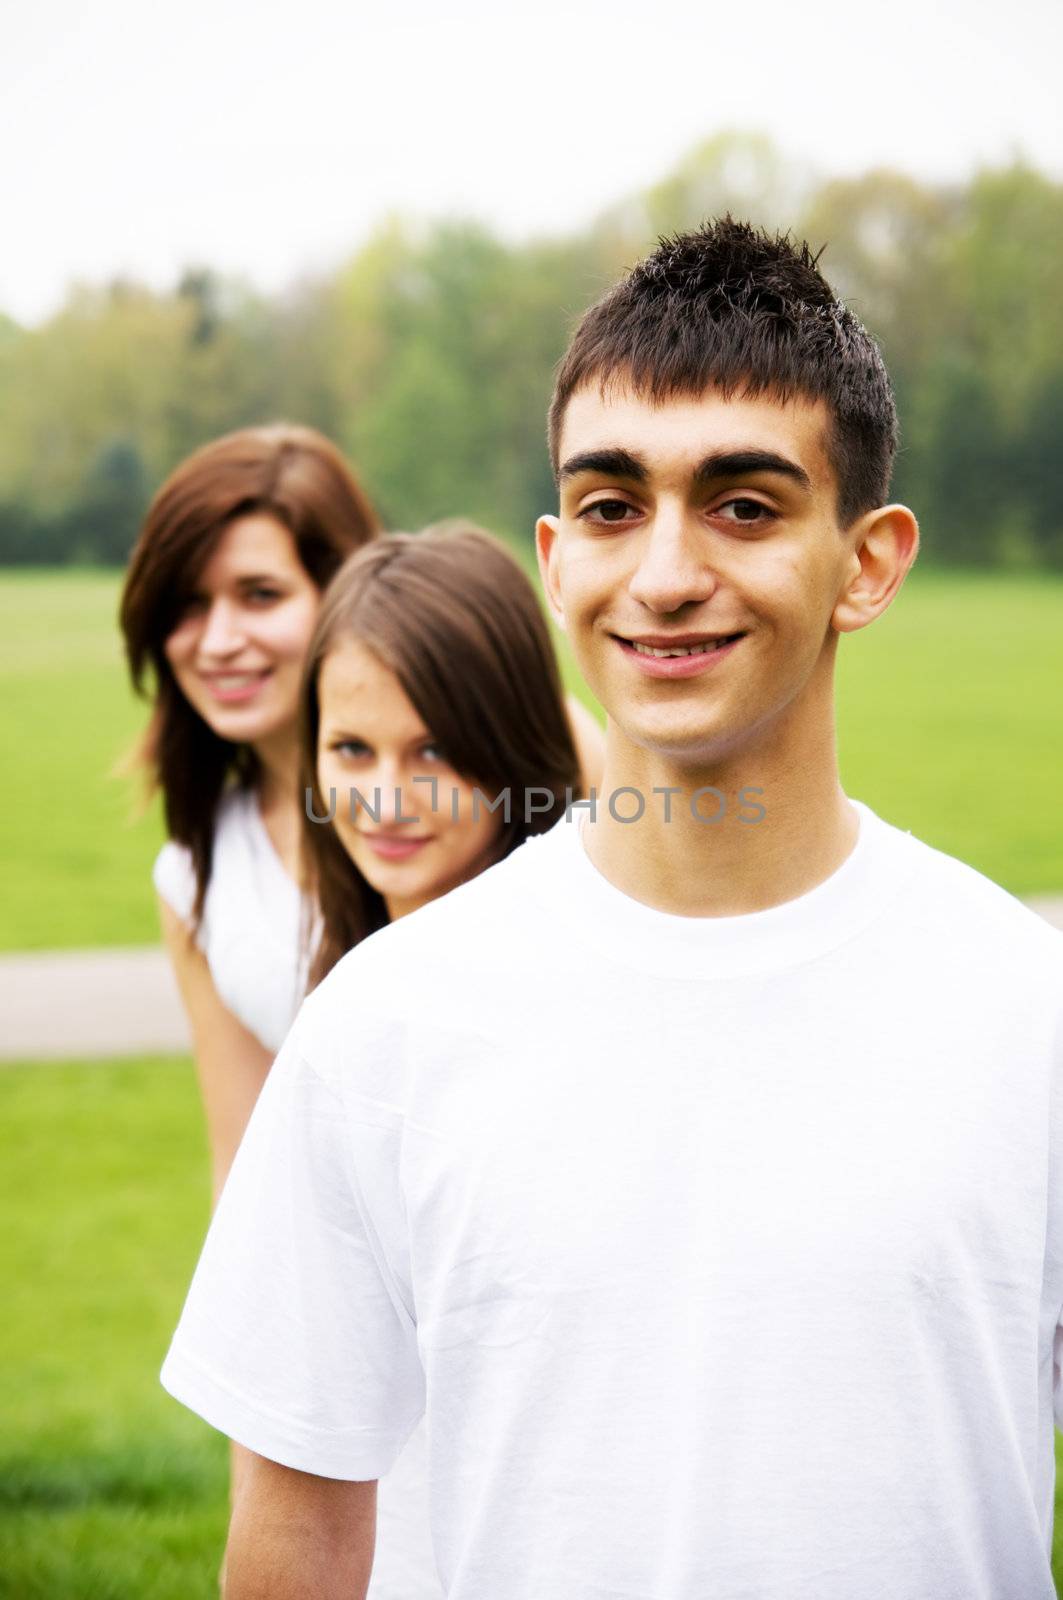 Group of teenagers standing and smiling. Boy in the foreground